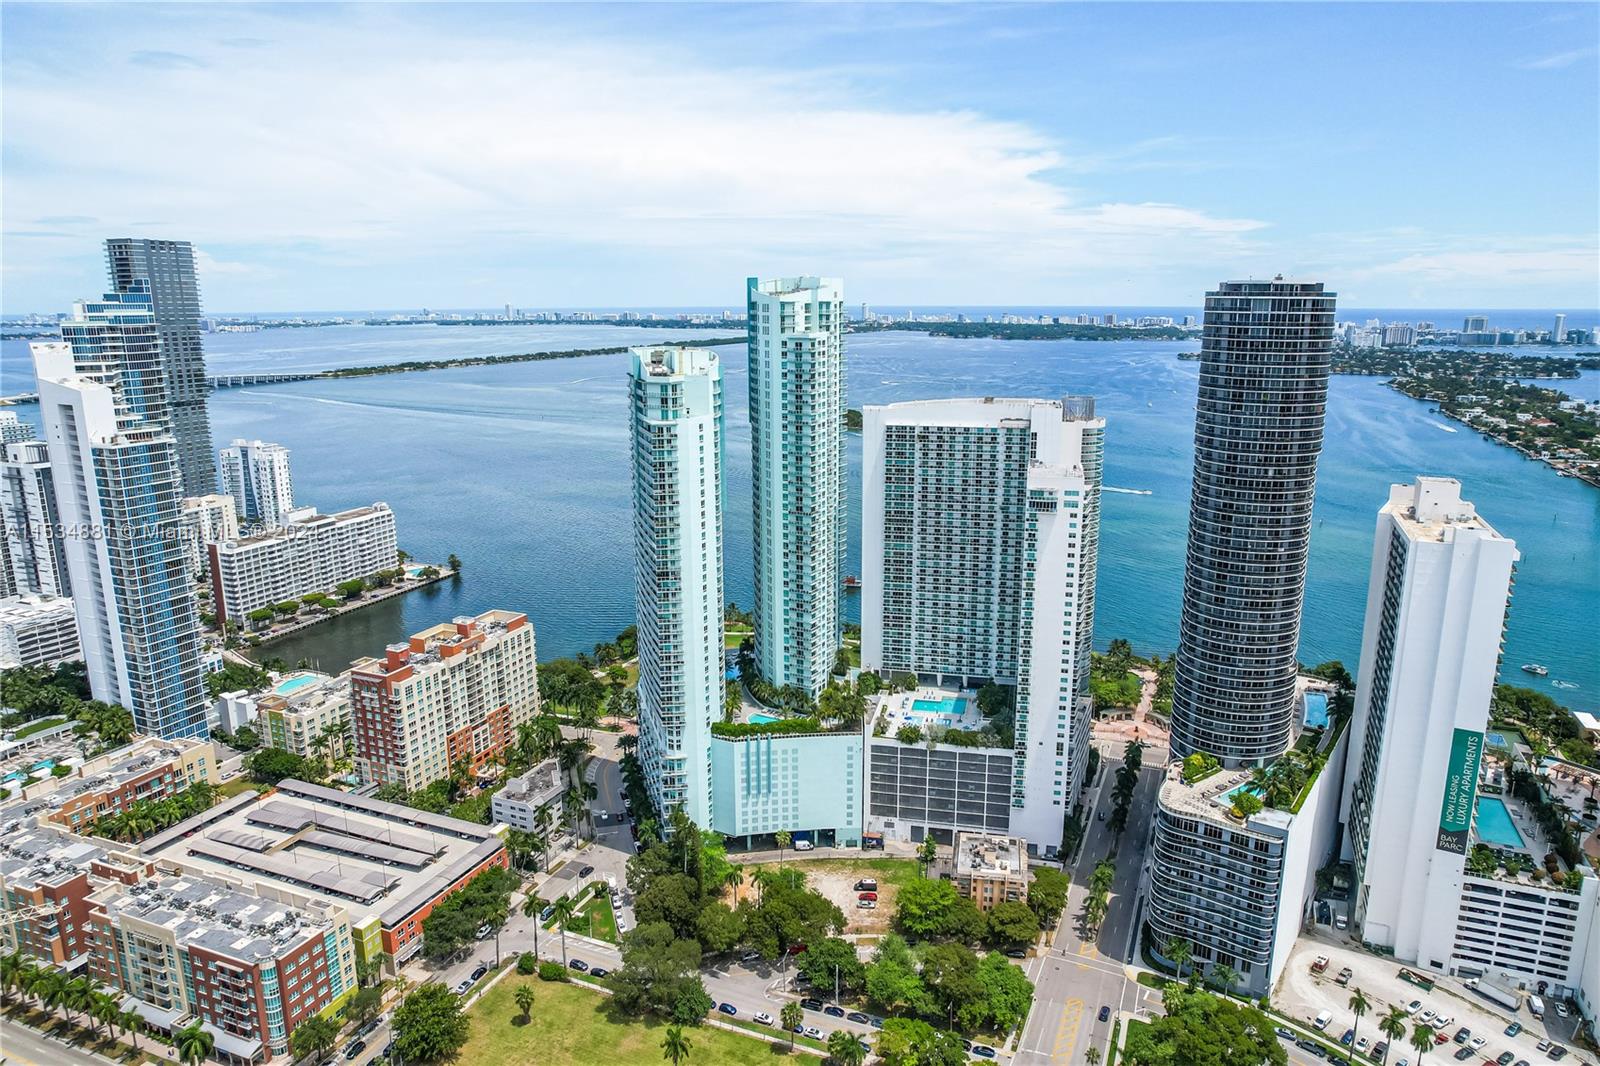 Welcome to a lifestyle from the 20th floor at Quantum on The Bay. 1 bedroom 1 bath bay front condo for sale has incredible views of Biscayne Bay. Located in Edgewater Miami directly across the street from Margaret Pace Park, which includes tennis courts, a basketball court, a children’s playground, a volleyball court, a gated dog park. Residents enjoy a number of amenities, including 24-hour concierge and security, valet parking, two swimming pools, a two-story fitness center, a sauna, a two-story club room and billiards tables, theater room, and convenience store. 1 assigned parking space within covered parking garage. Pet friendly association. Building has reserves! No special assessments! Unit is ready for immediate move in for owner occupants and/or lease it right away for investors.